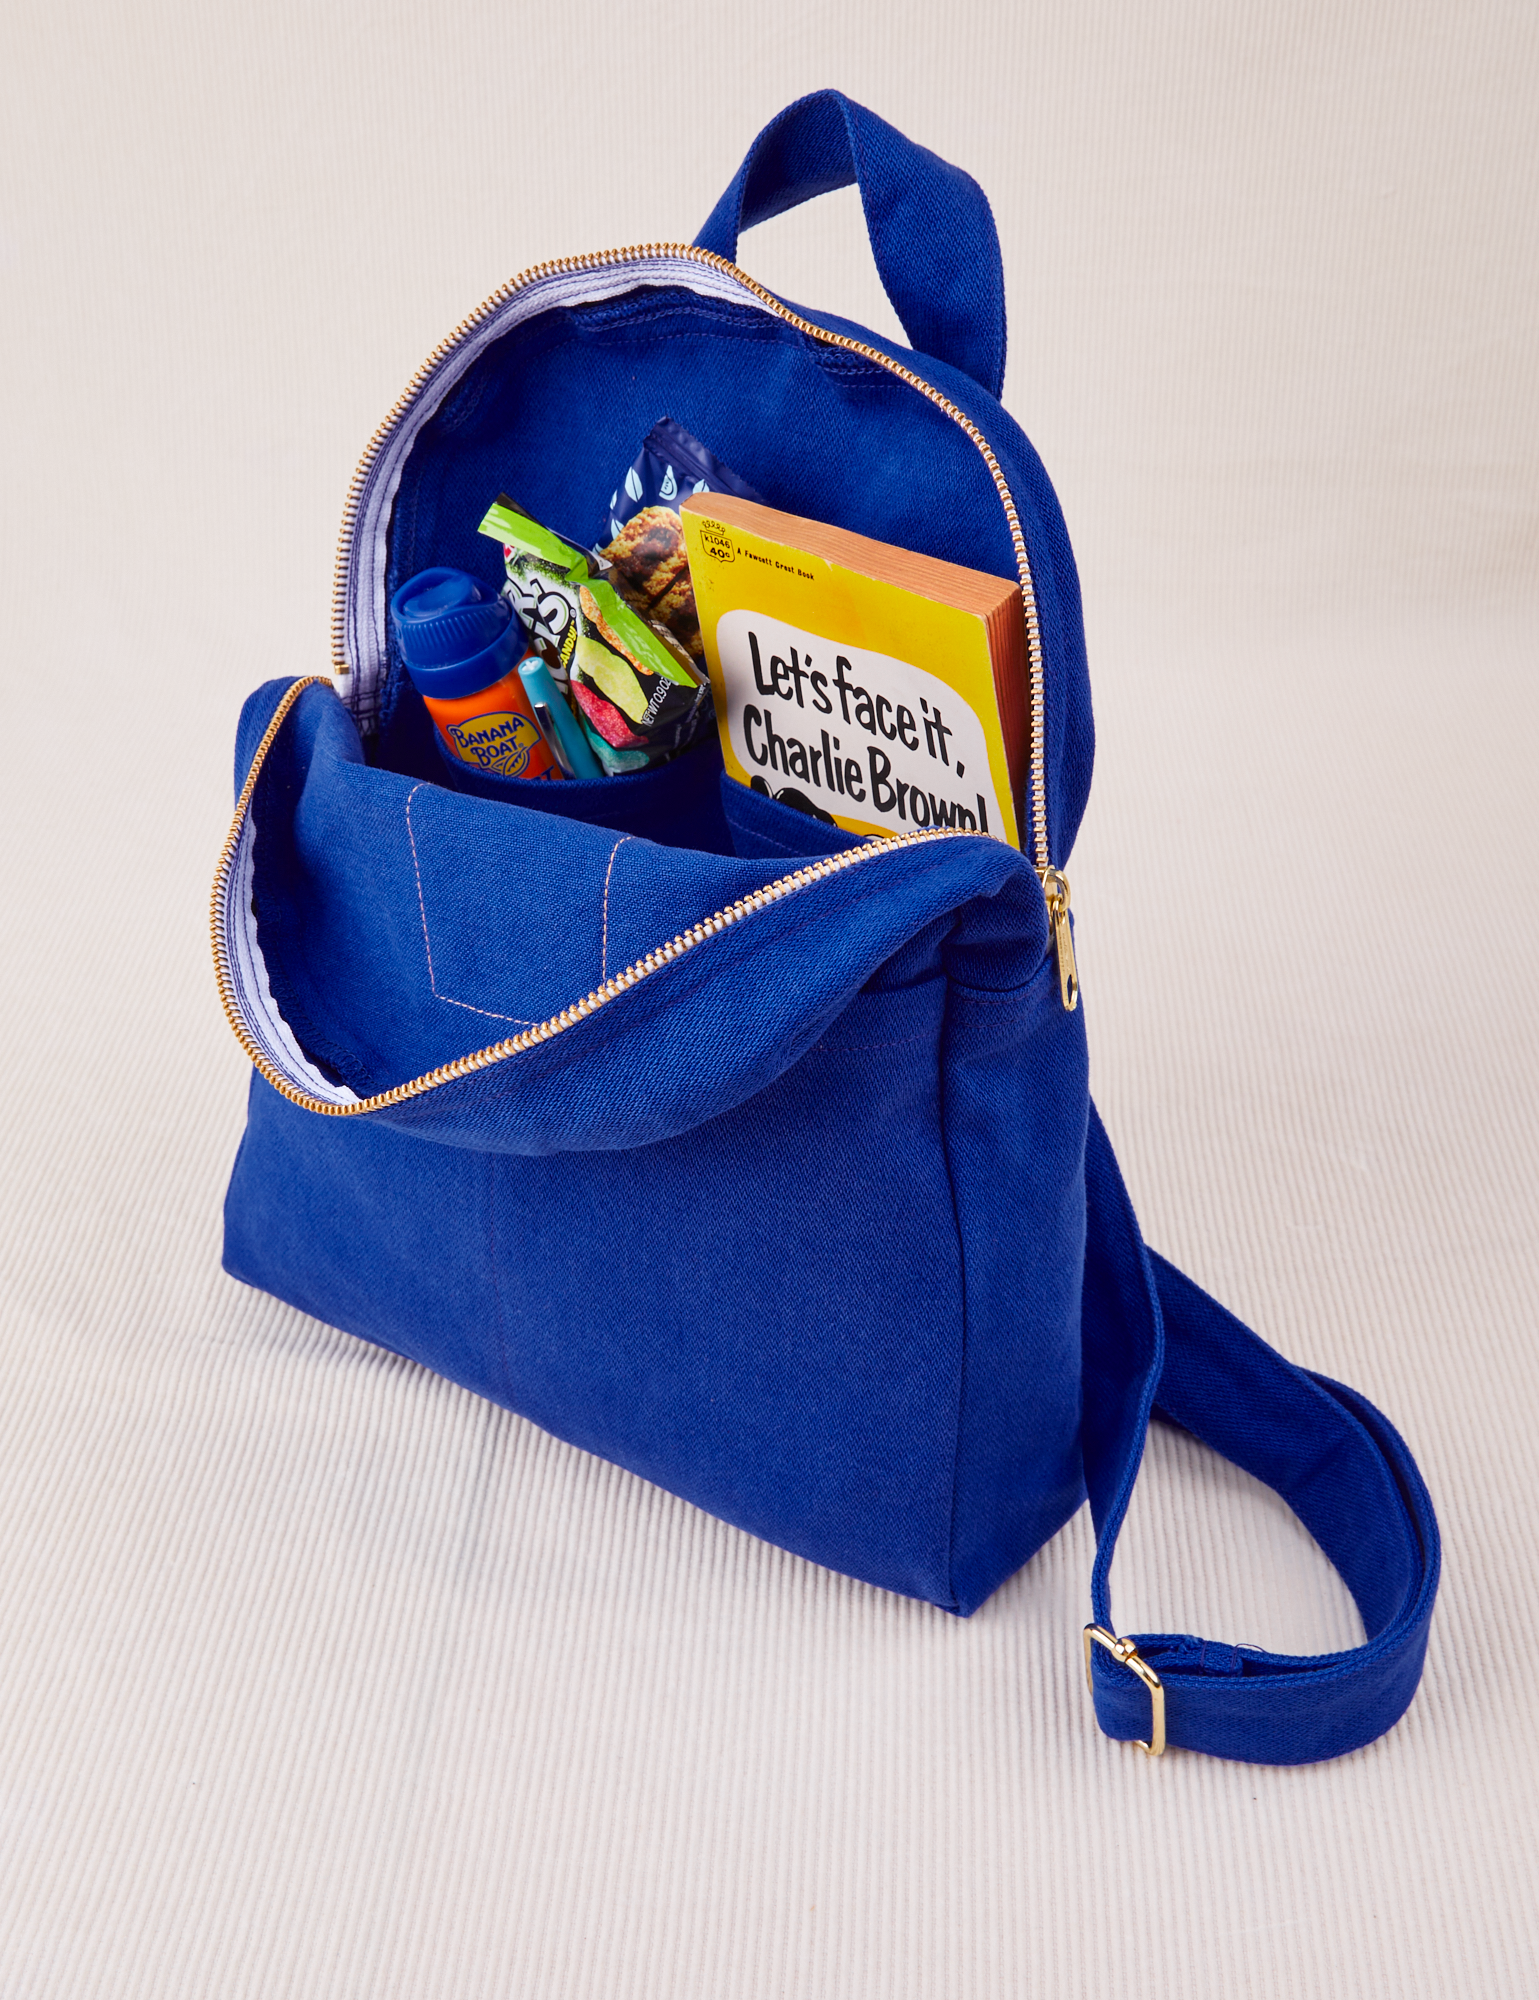 Mini Backpack in Royal Blue open with items in interior pockets